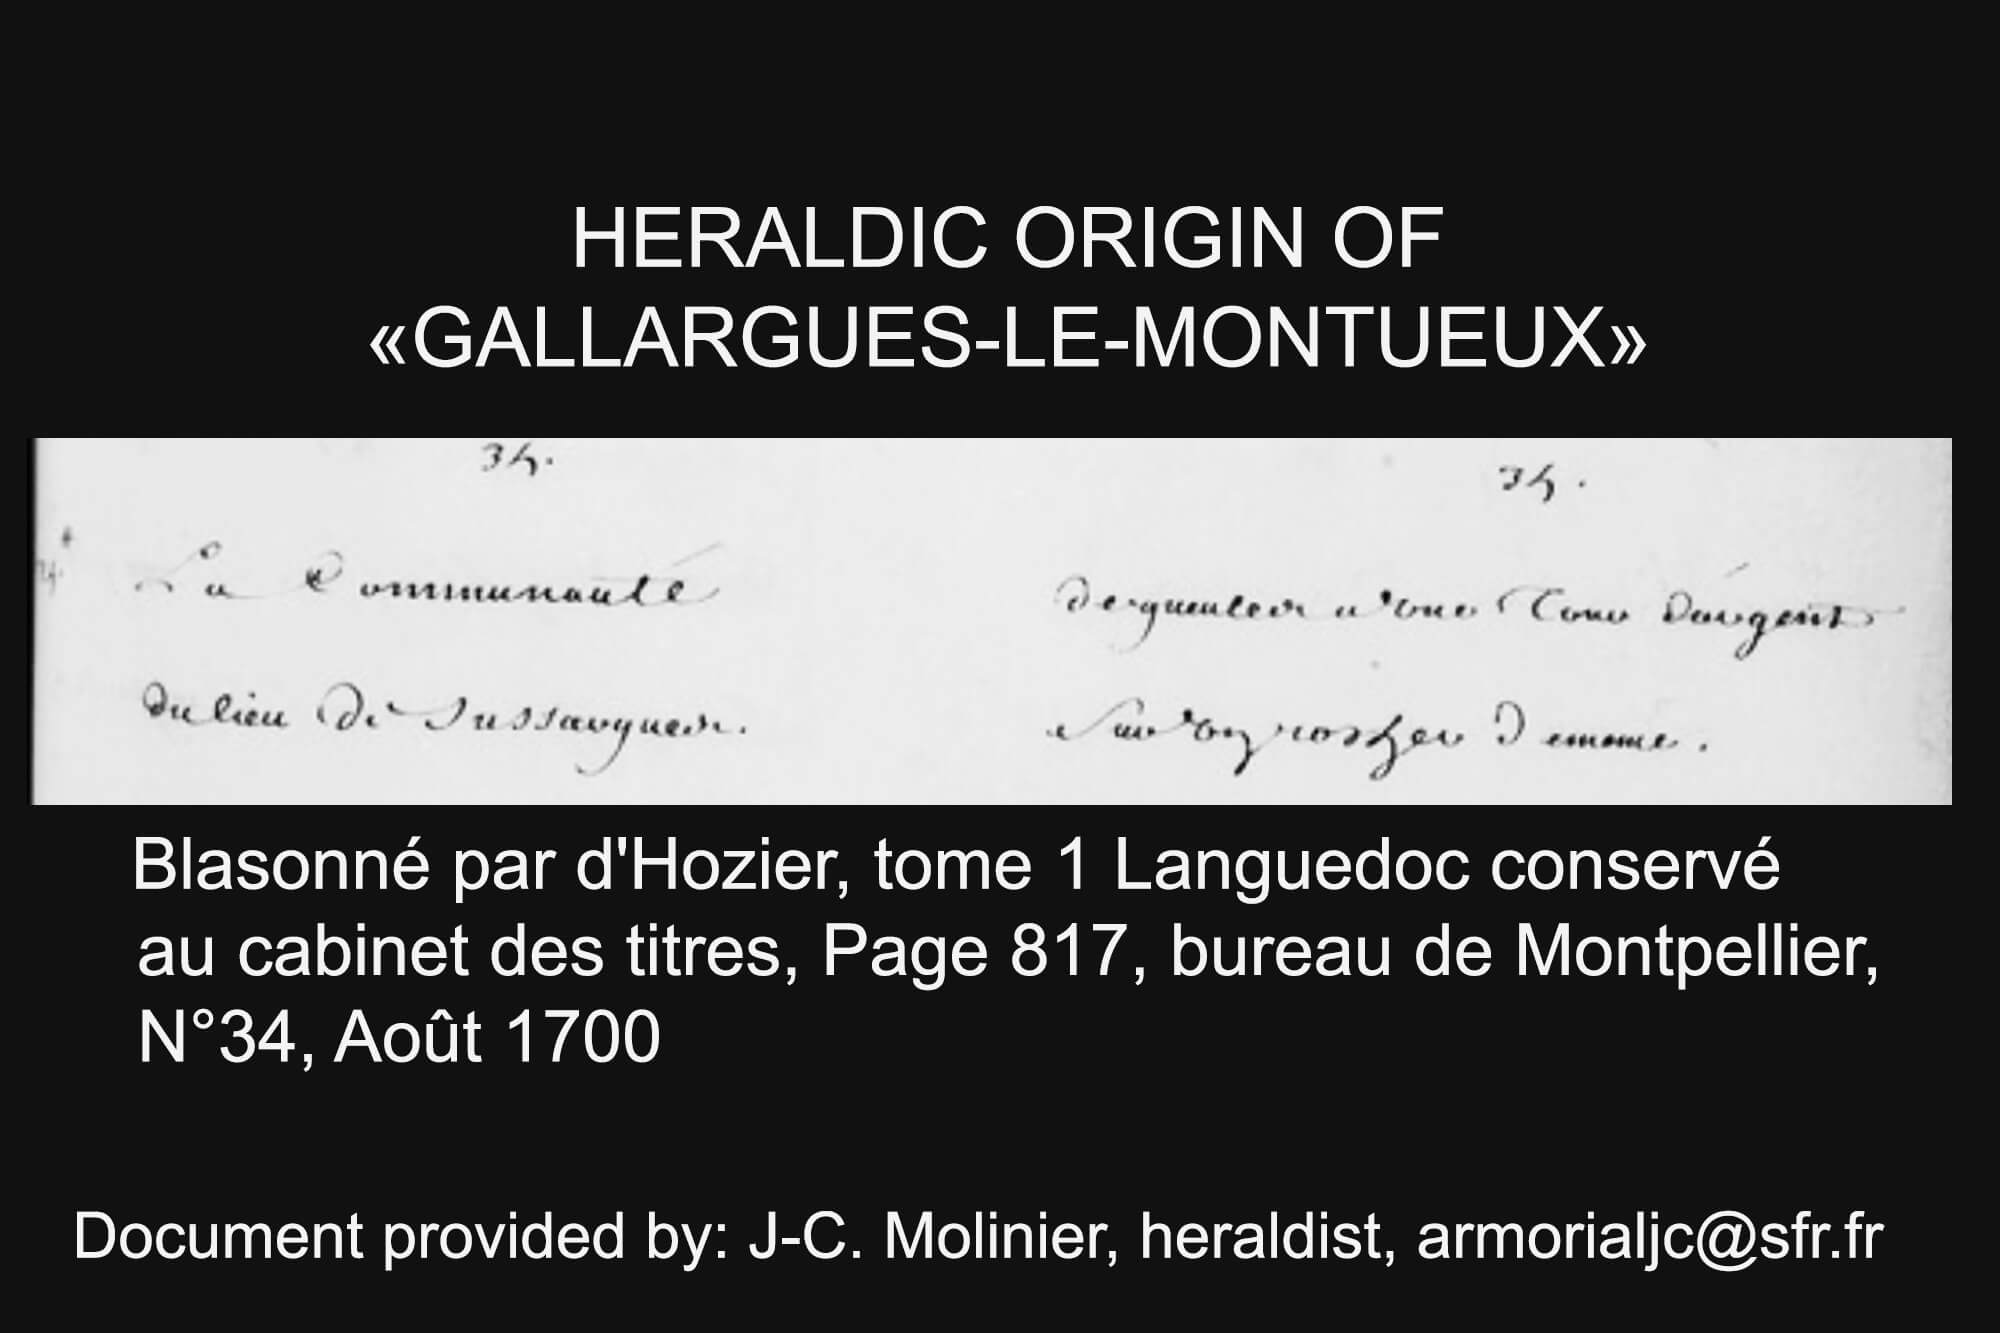 volume 1 Languedoc preserved in the cabinet of titles, Page 817, office of Montpellier, N°34, August 1700